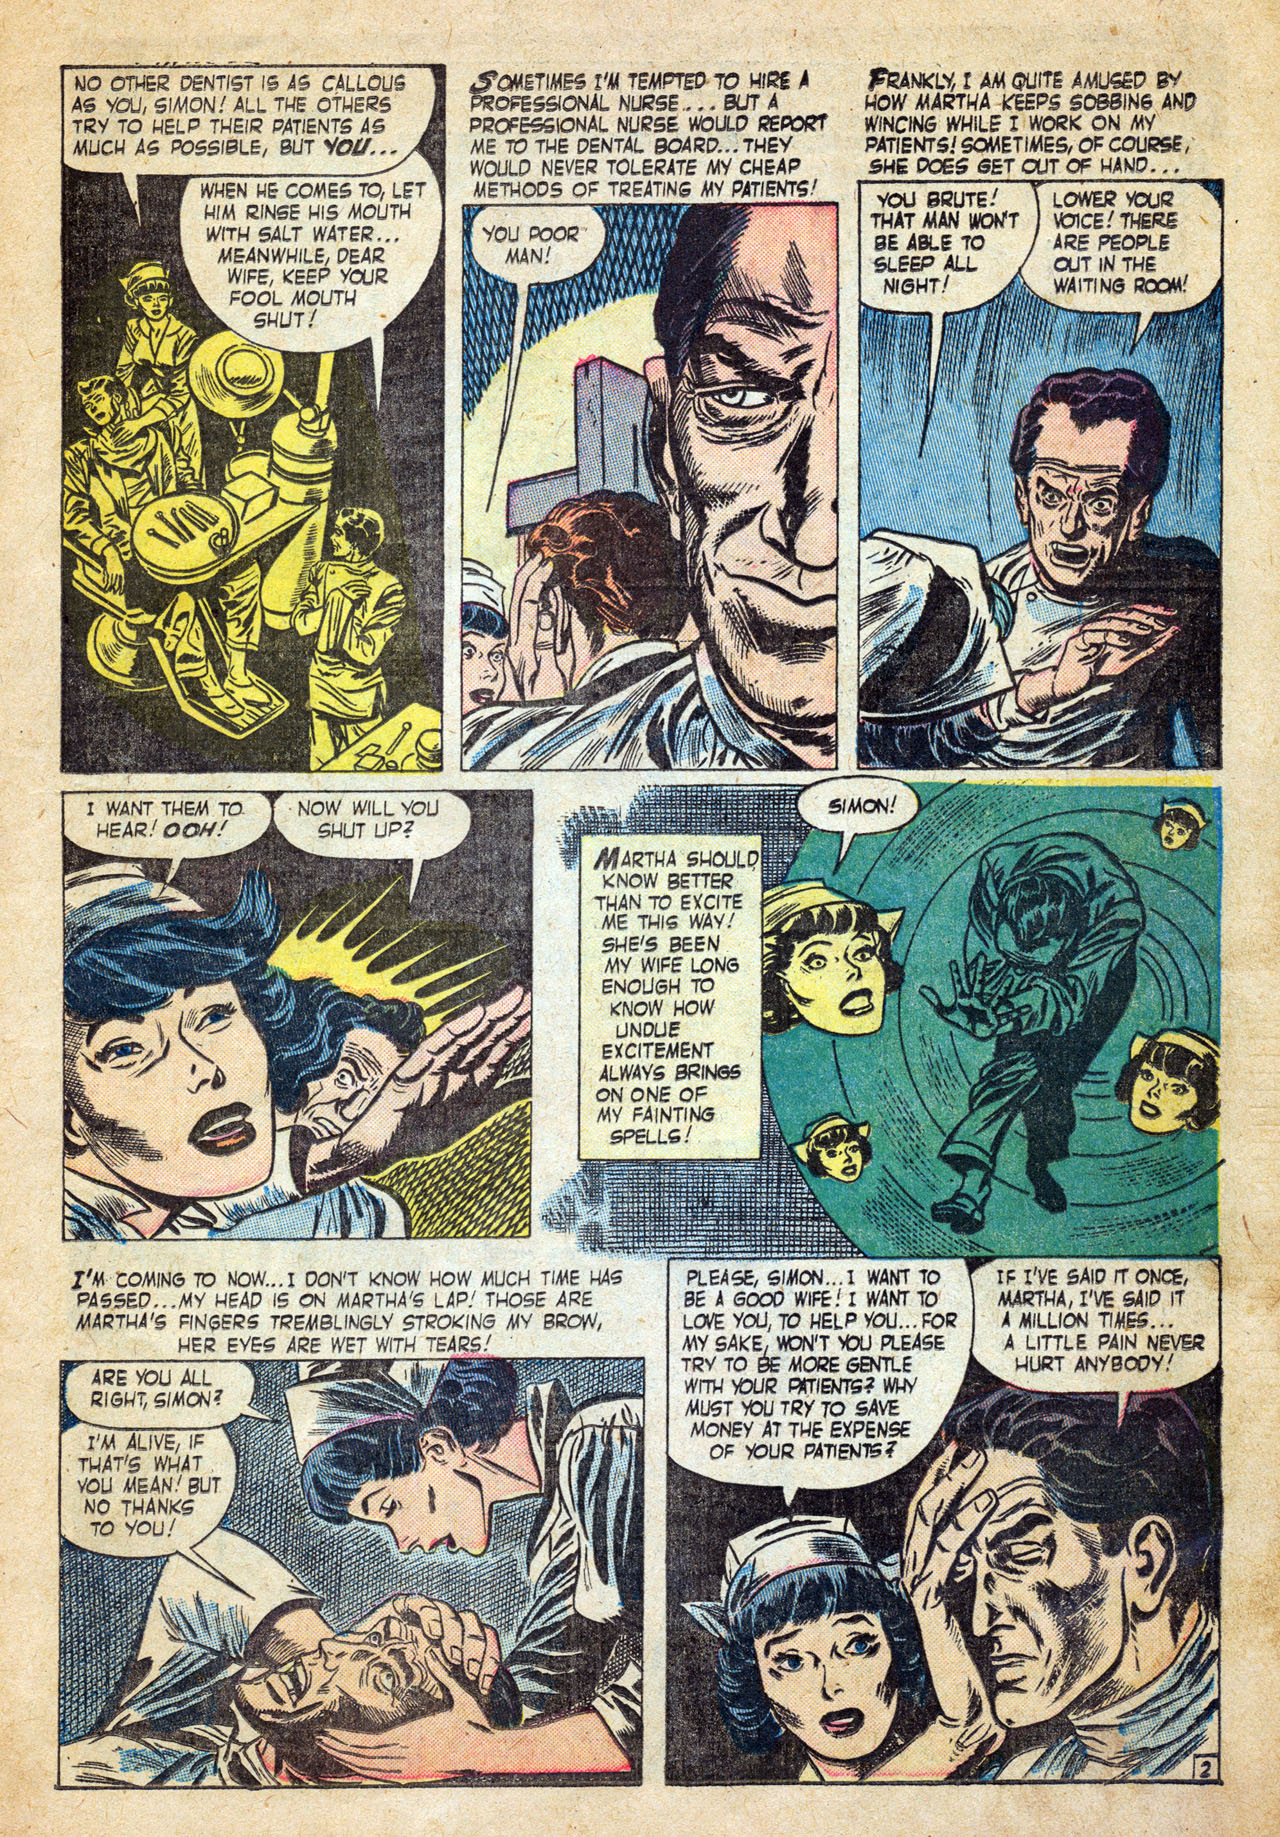 Marvel Tales (1949) 117 Page 10